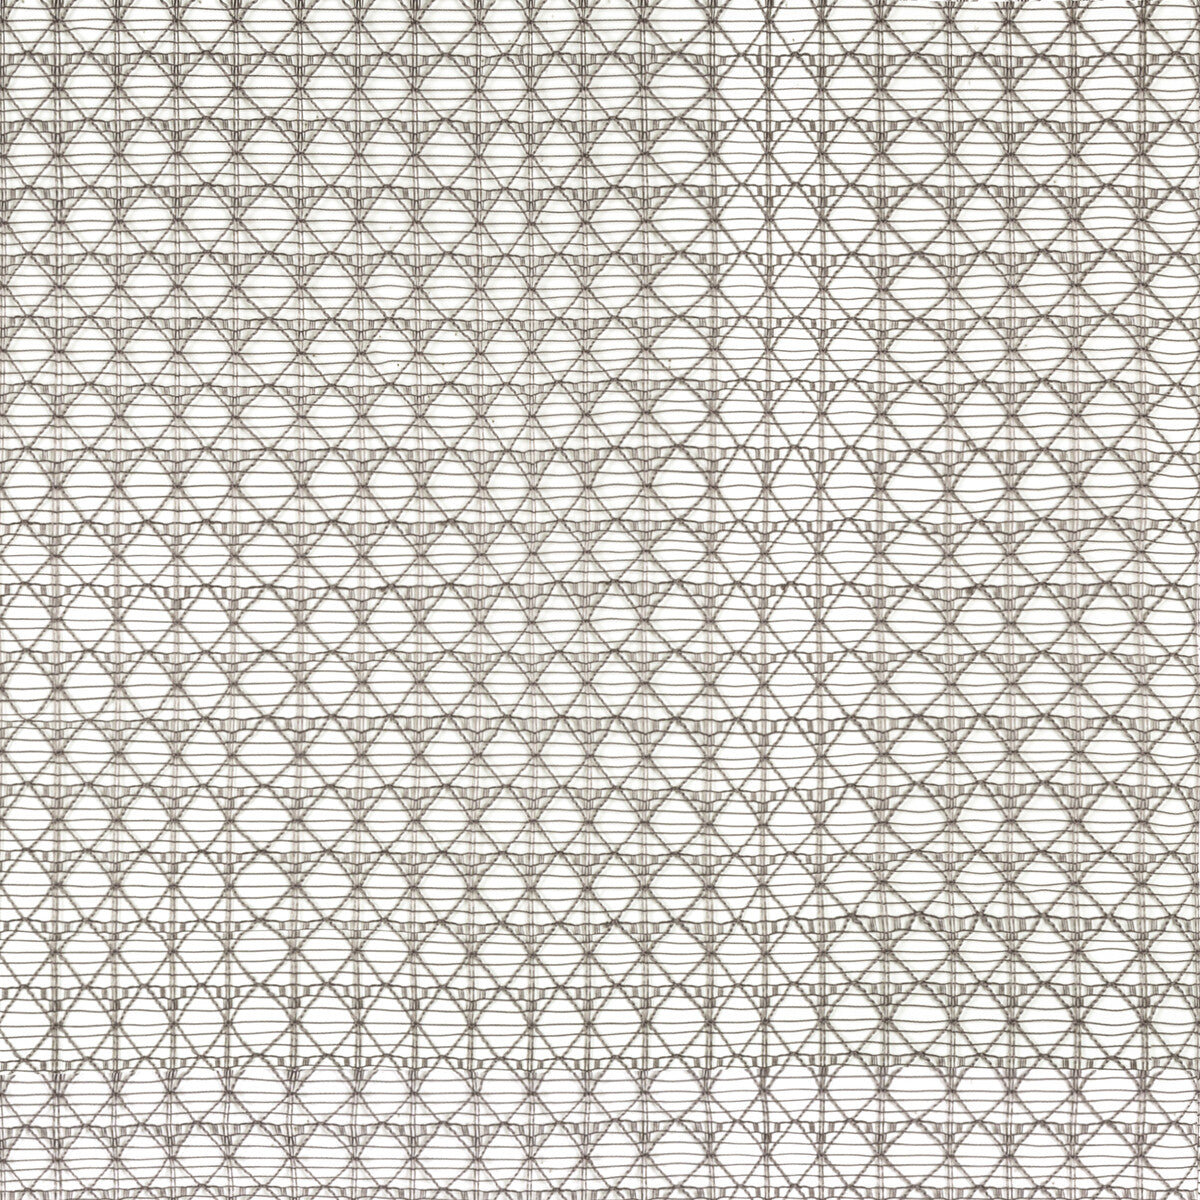 Intersecting fabric in ore color - pattern 4824.21.0 - by Kravet Contract